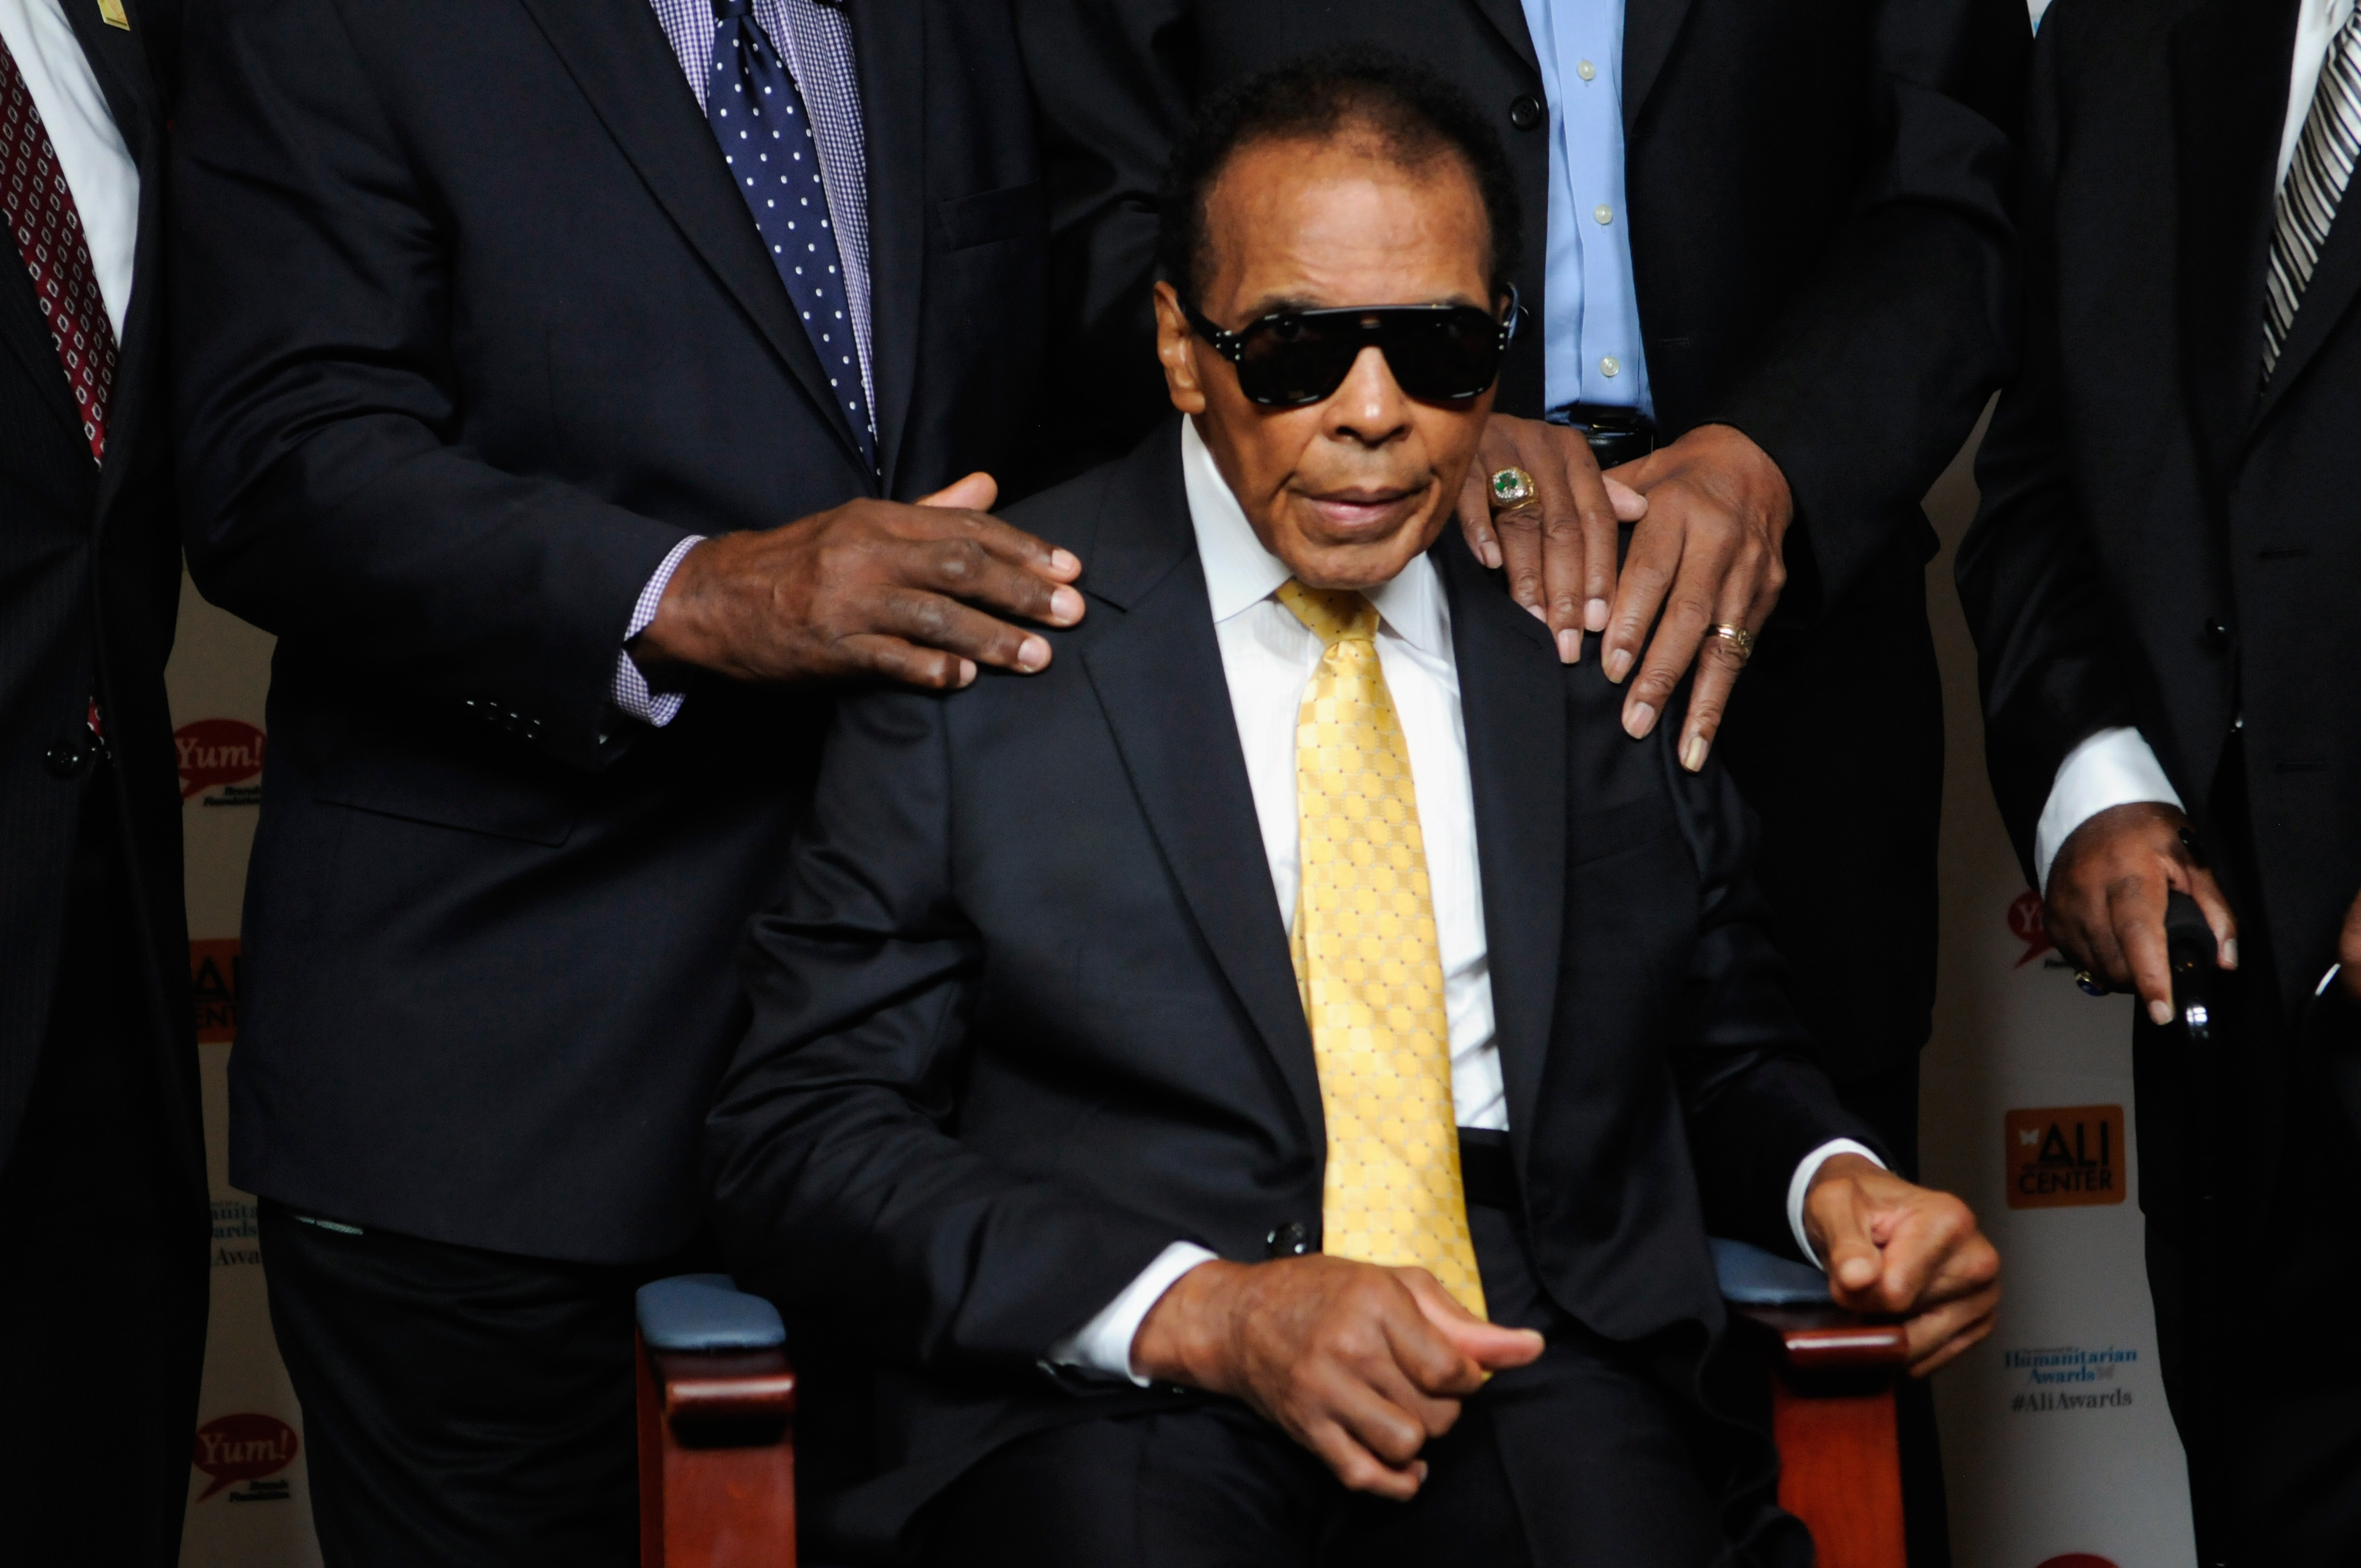 Muhammad Ali attends the 2014 Muhammad Ali Humanitarian Awards at the Louisville Marriott Downtown on September 27, 2014 in Louisville, United States. (Stephen J. Cohen/Getty Images)